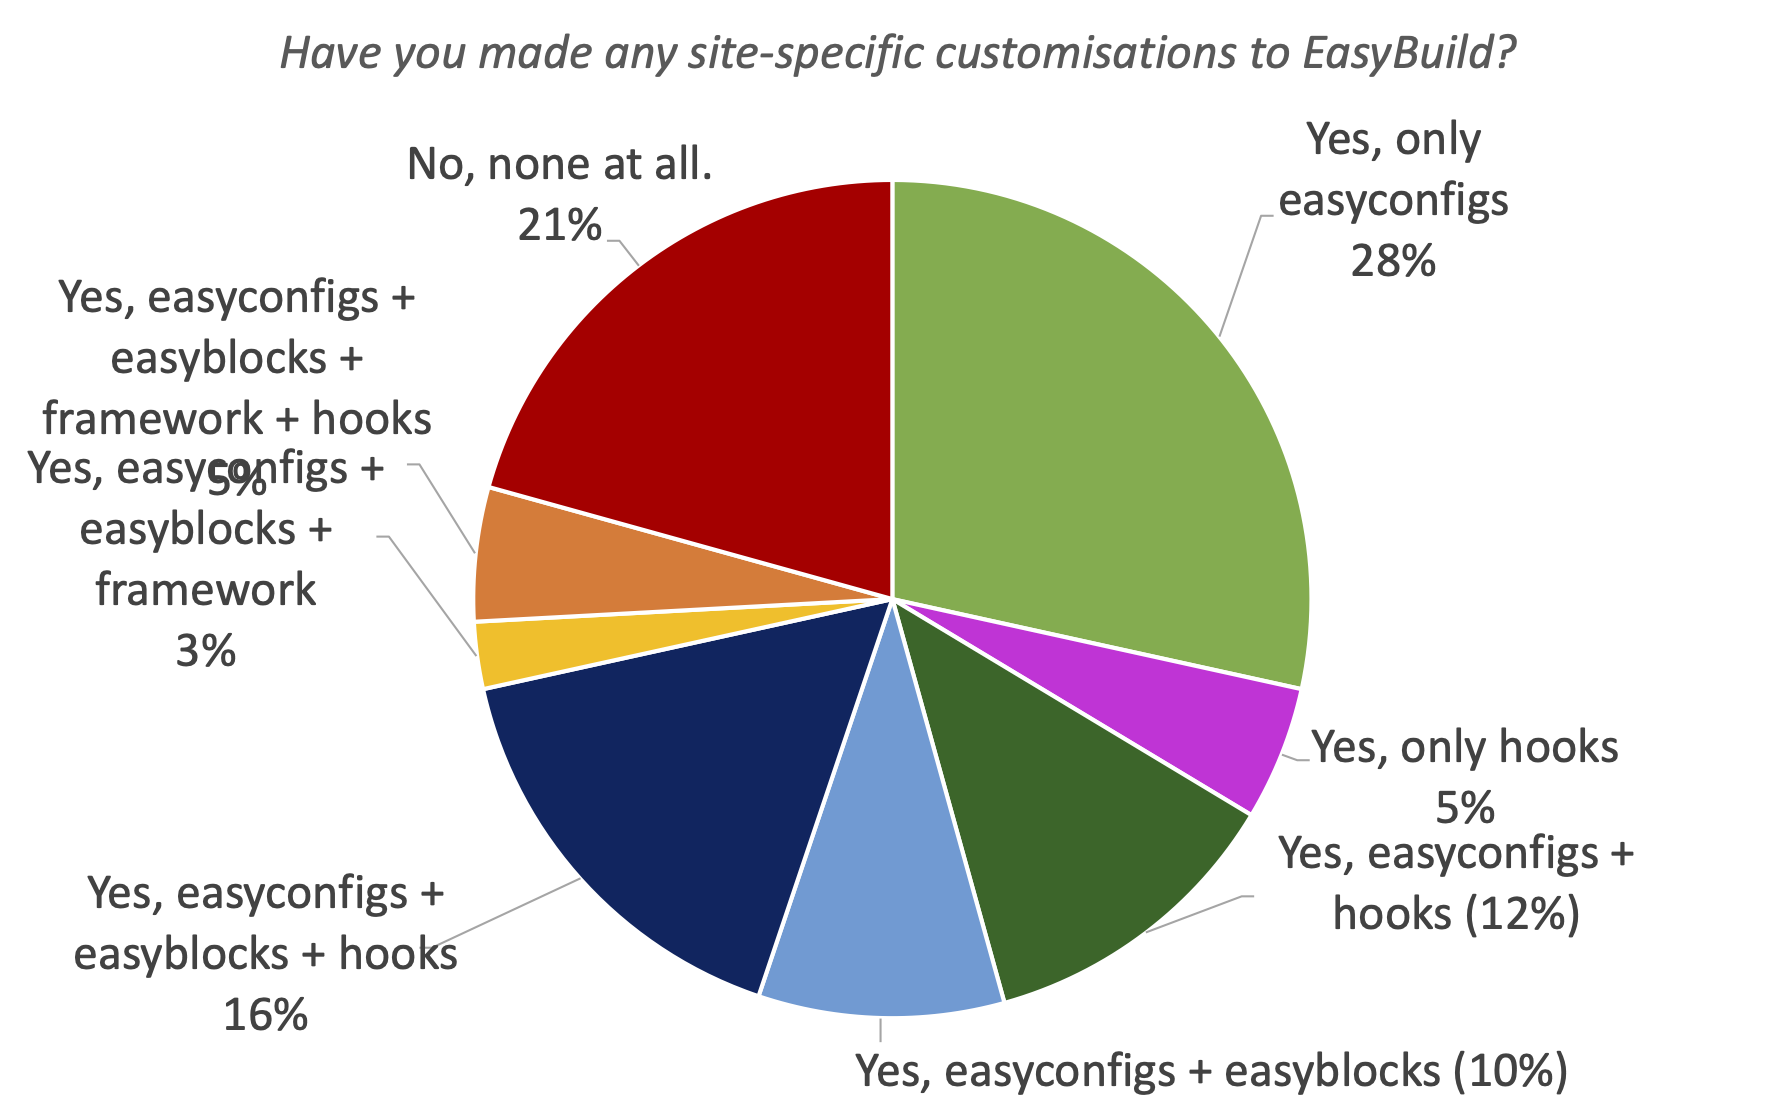 29. Have you made any site-specific customisations to EasyBuild?